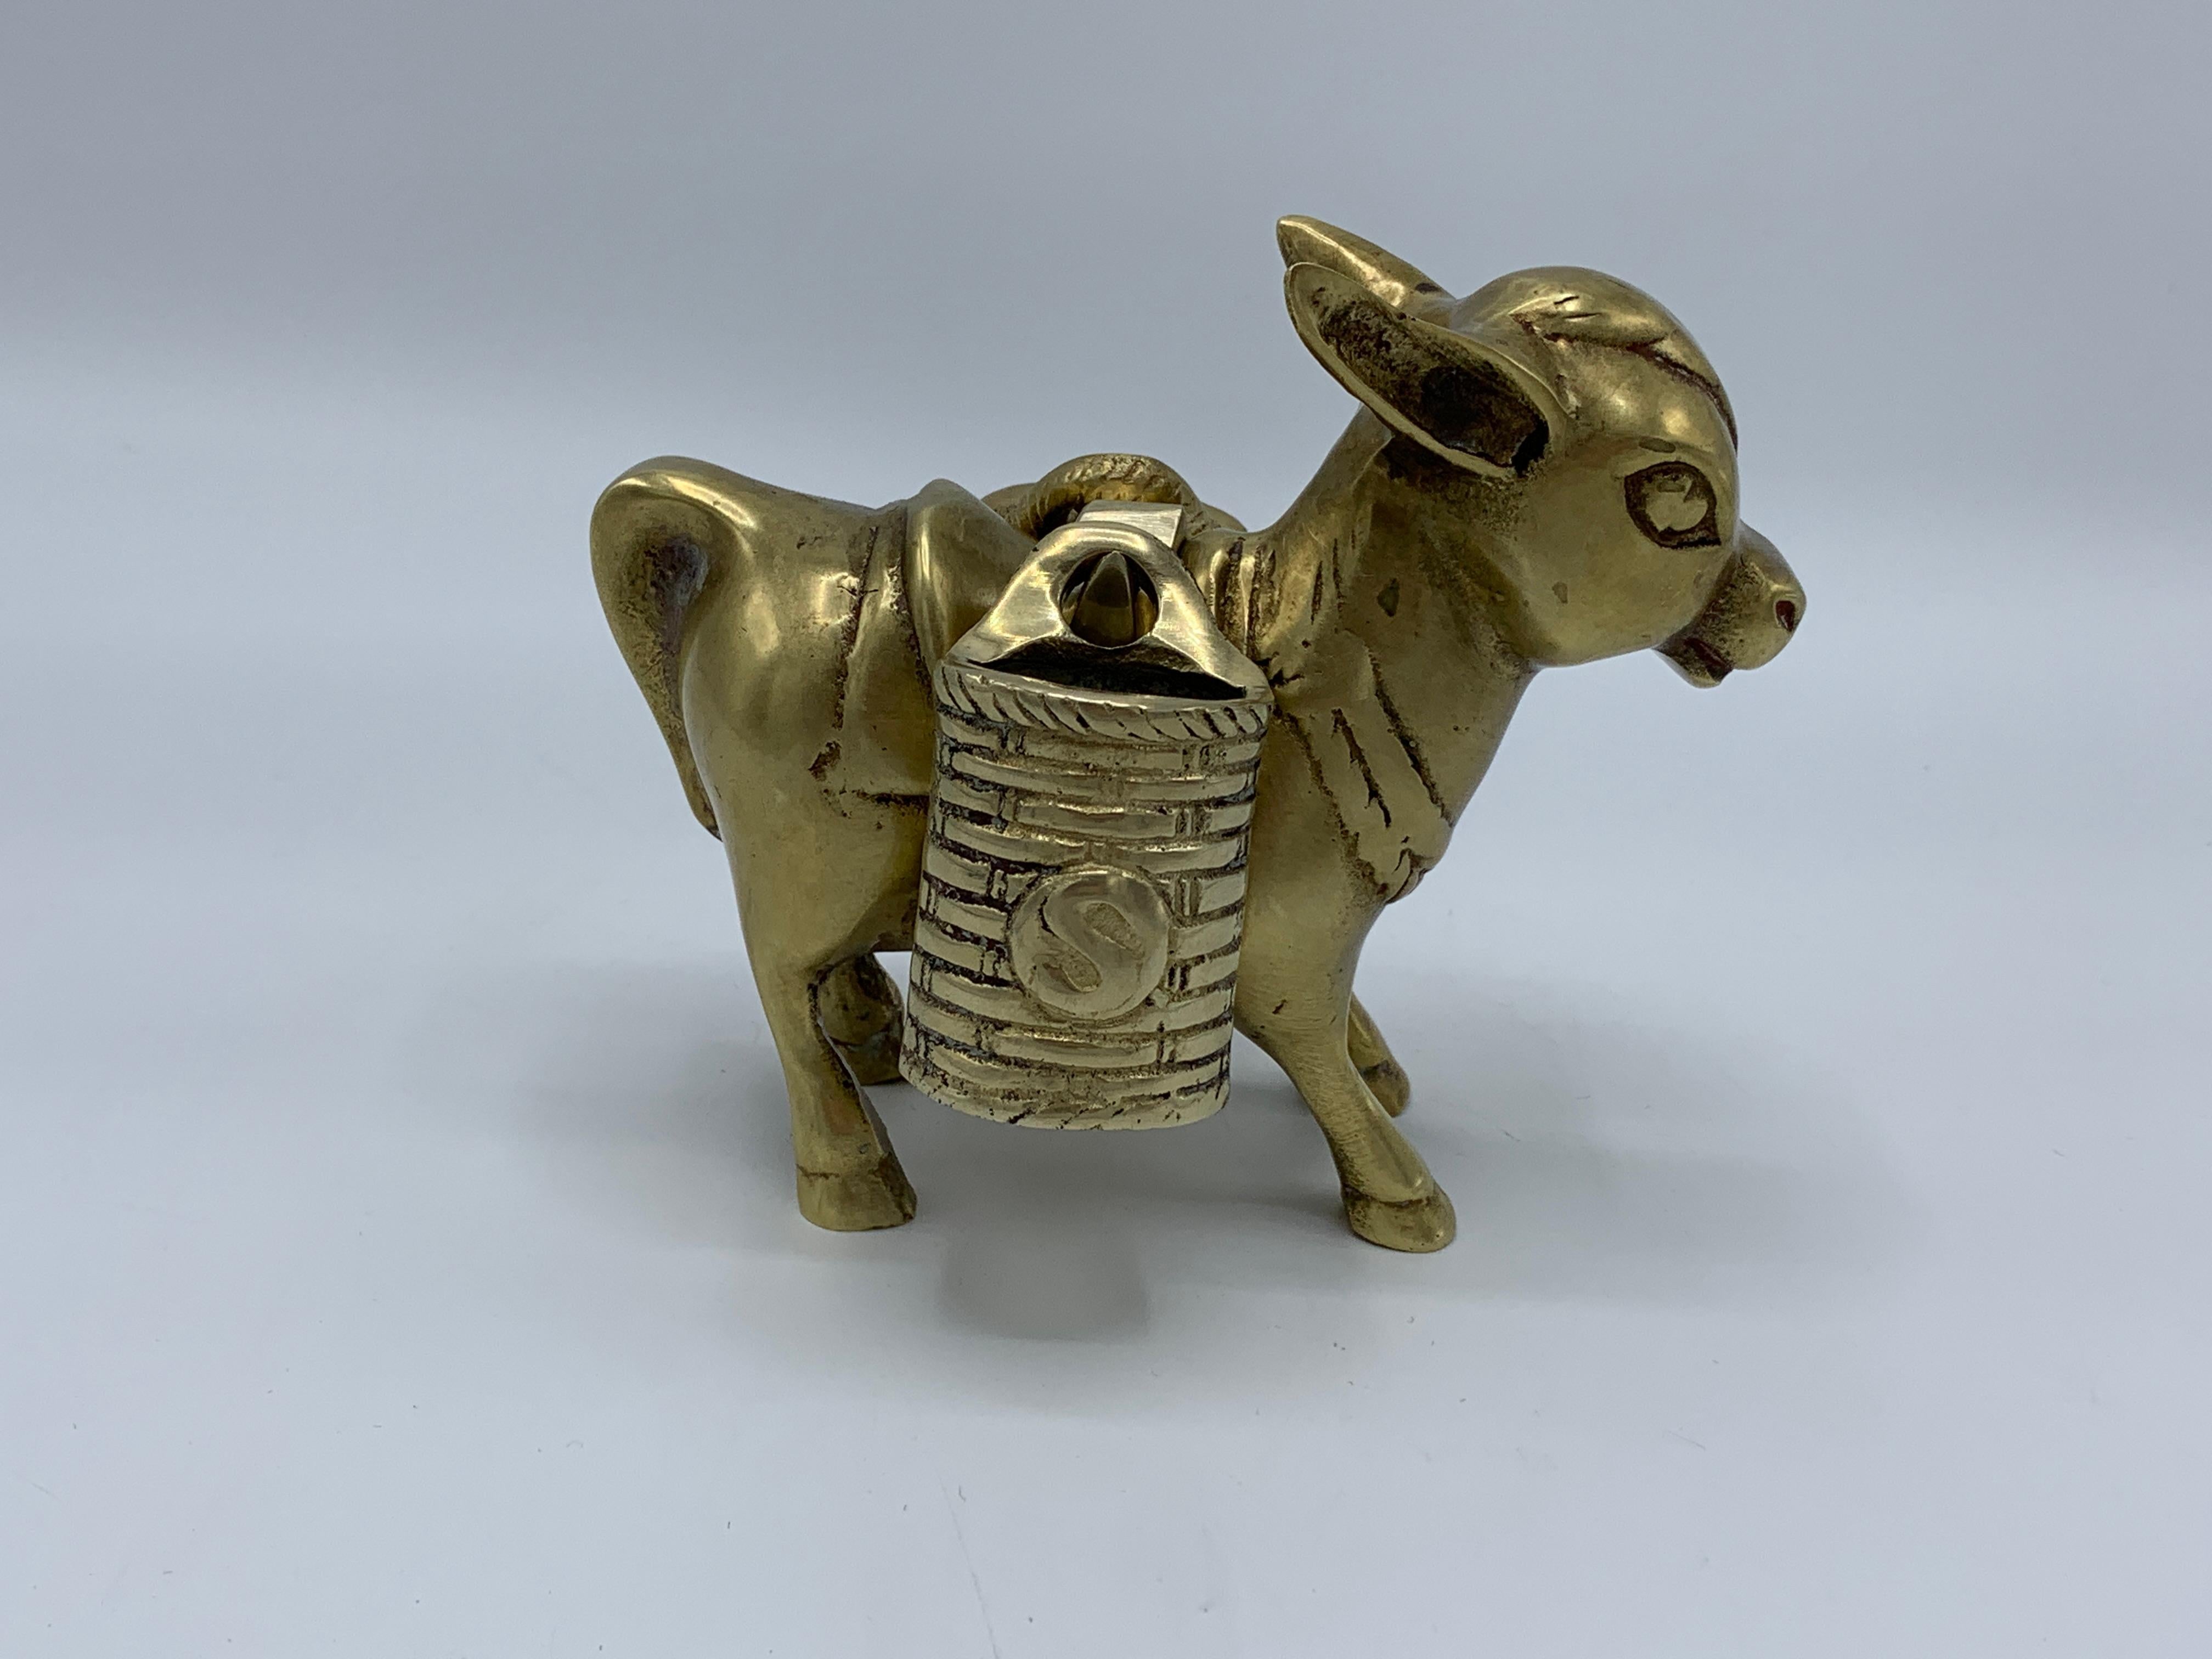 20th Century 1960s Brass Mule with Saddle Bag Salt and Pepper Shaker Set